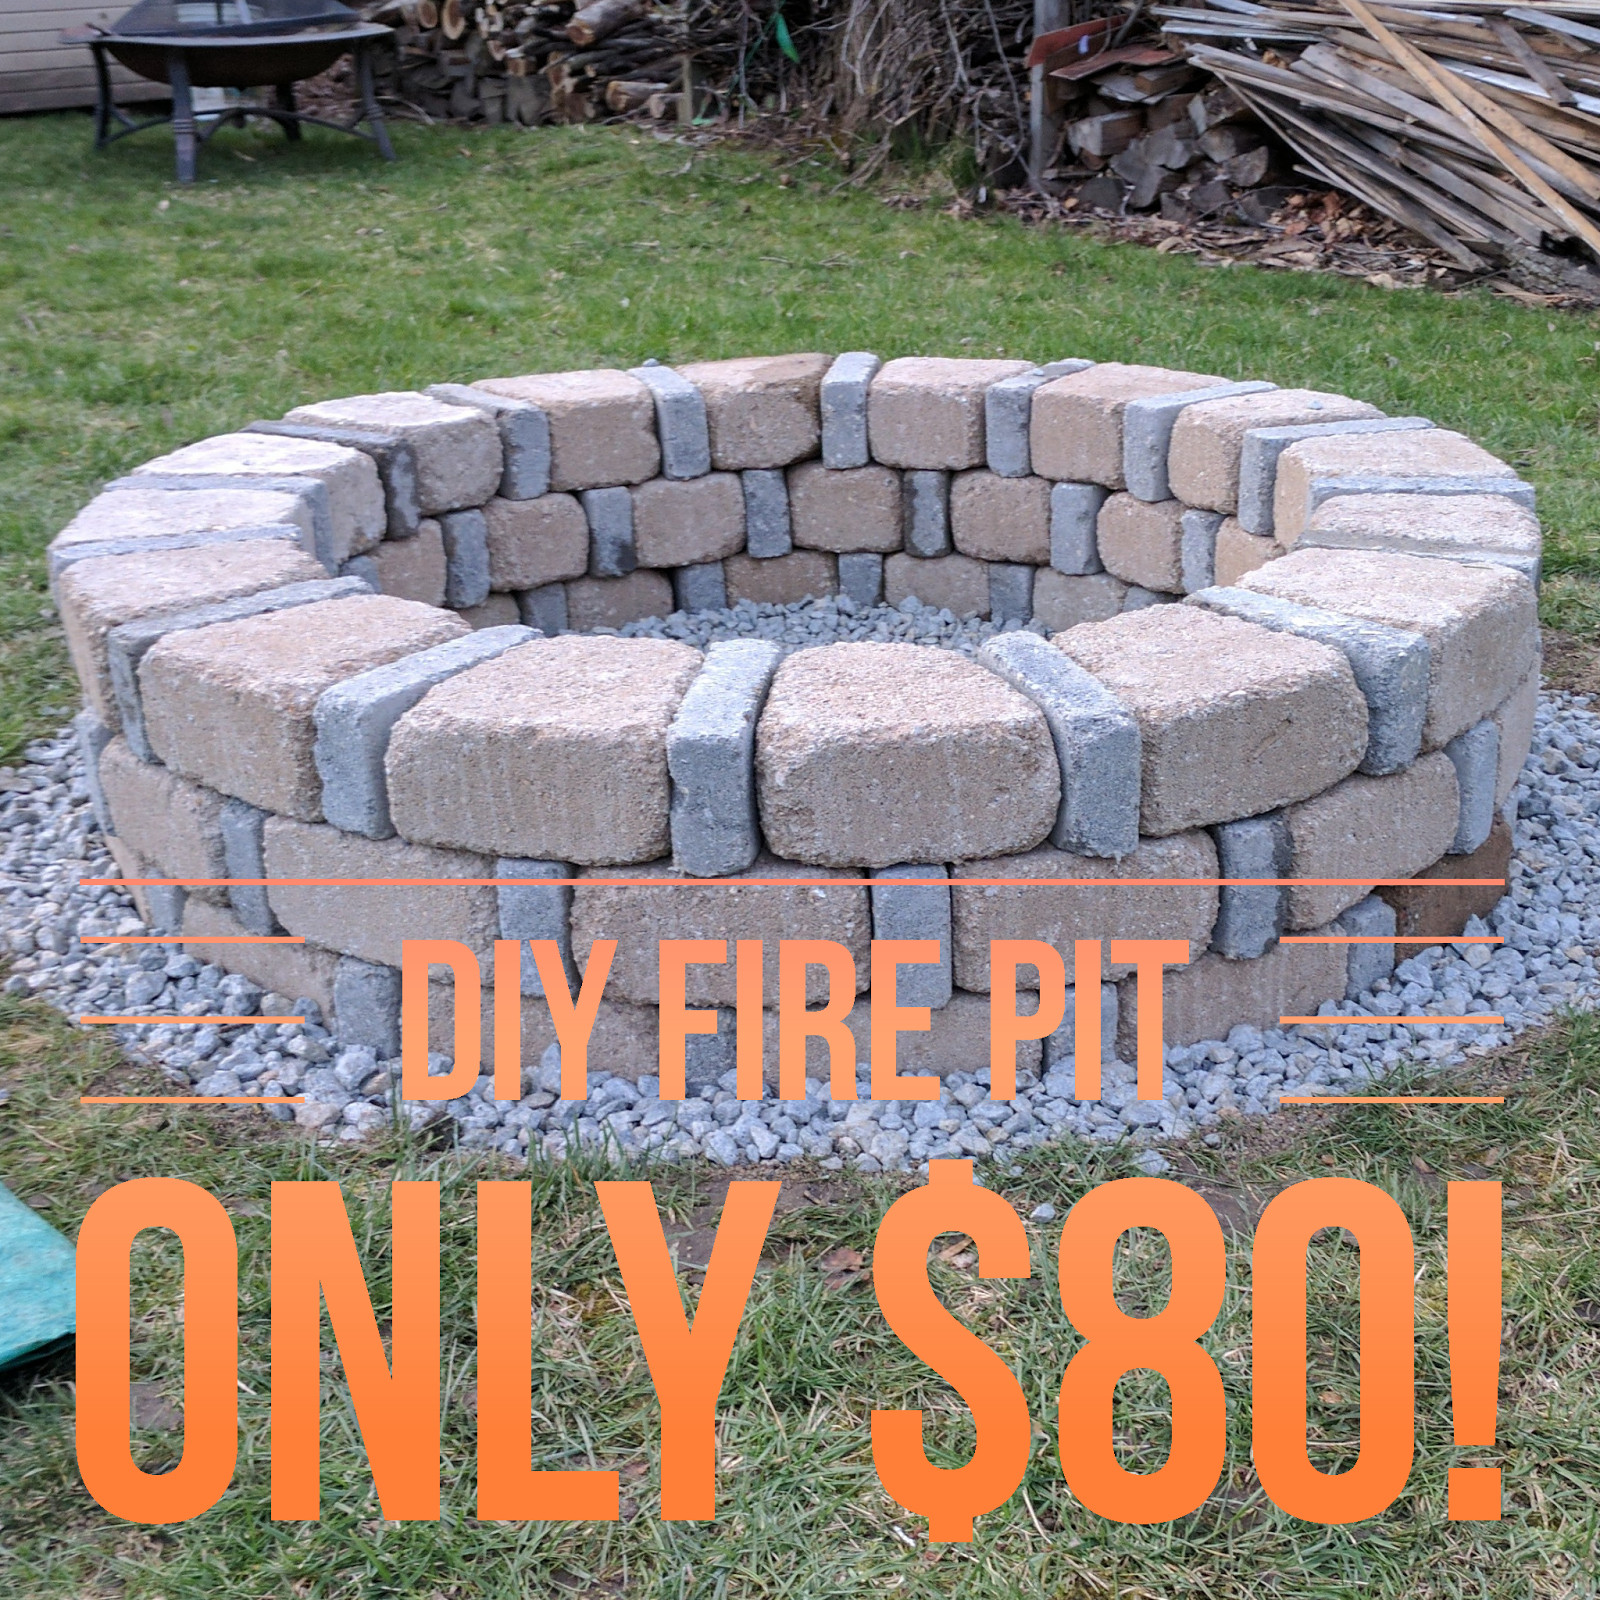 DIY Outdoor Firepit
 DIY Brick Fire Pit For ly $80